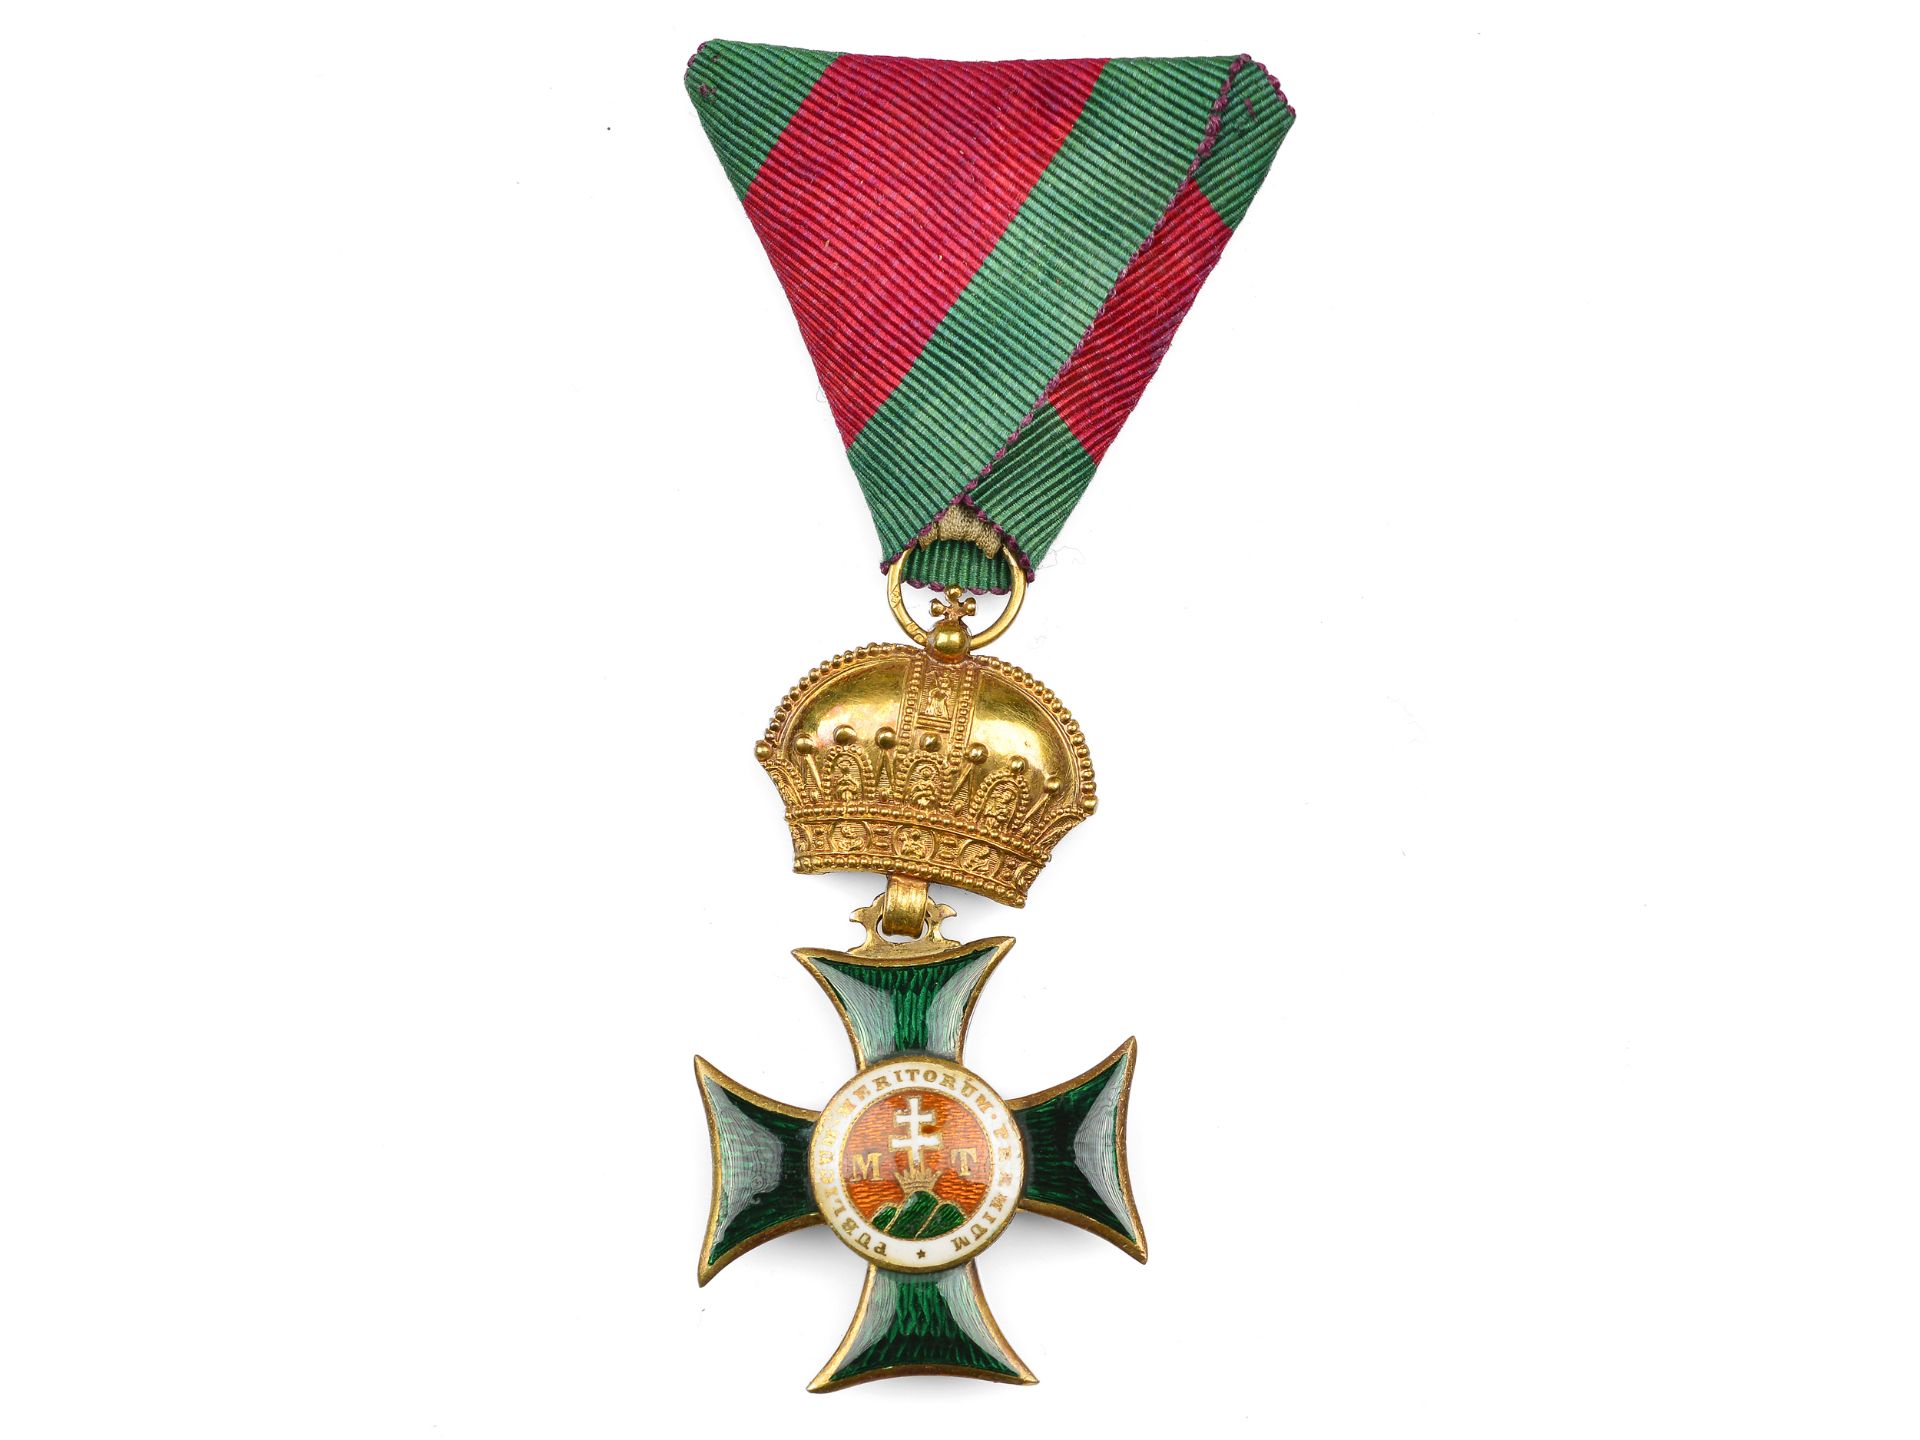 Royal Hungarian Order of St Stephen, founded in 1764, Knight's Cross with triangular ribbon, C. F. R